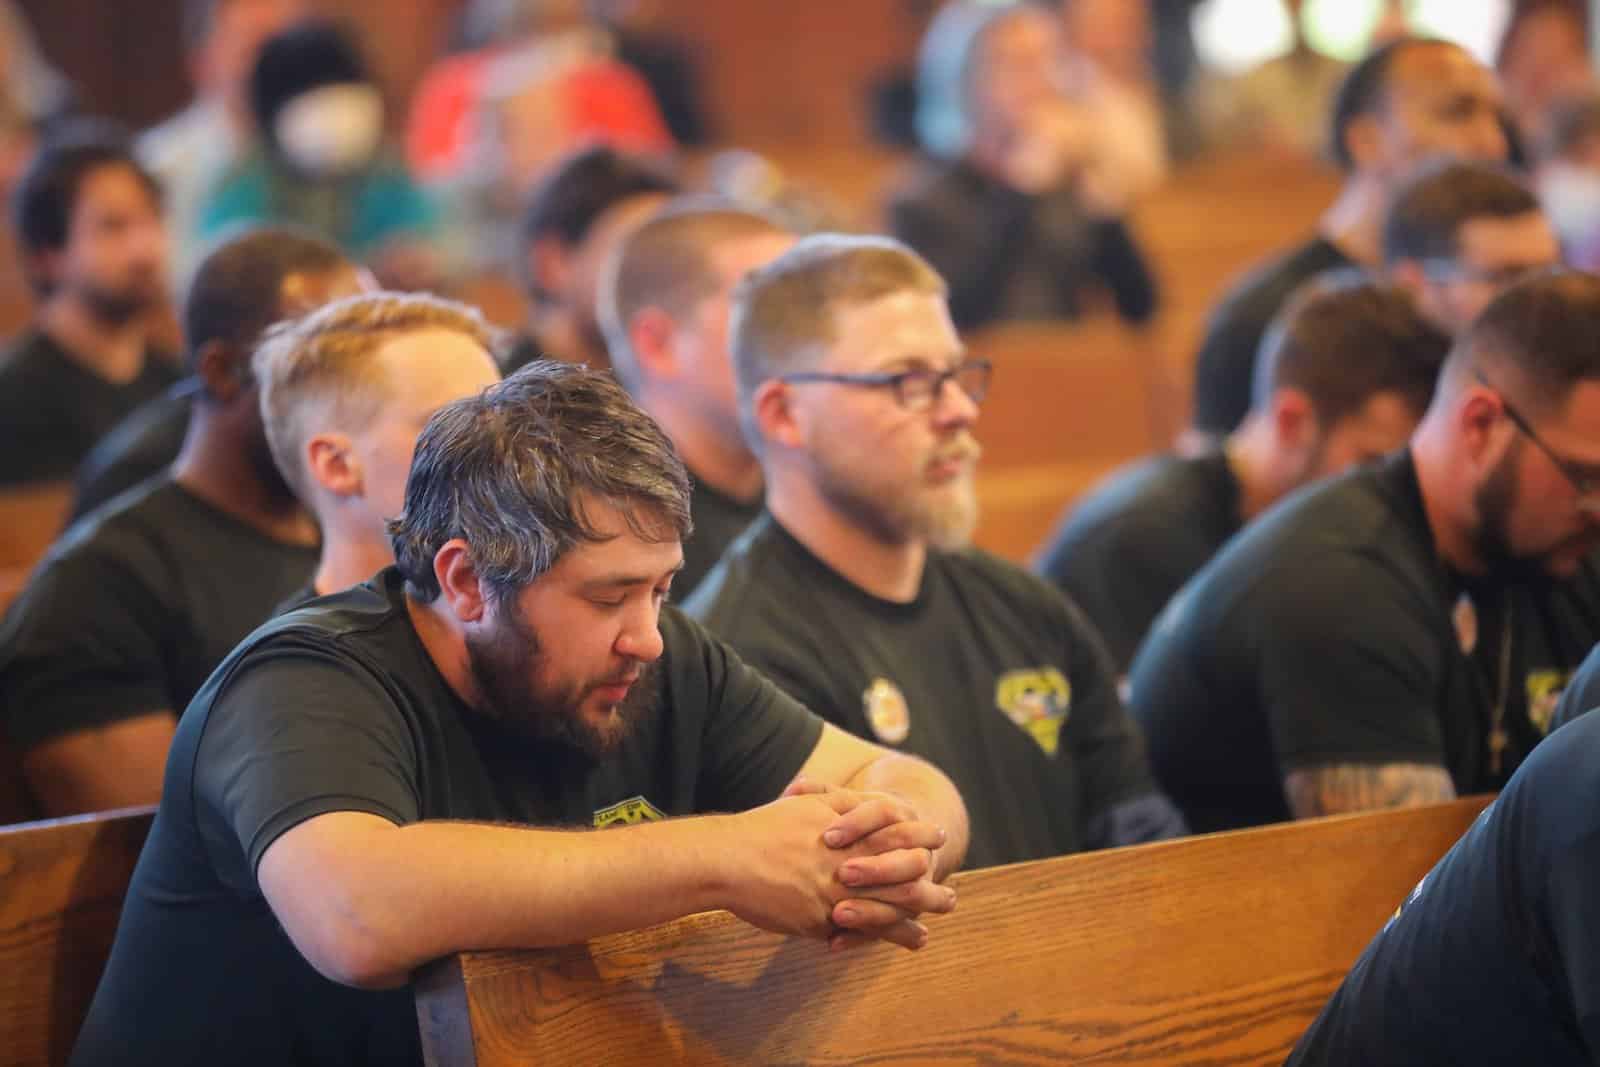 Two men in dark t-shirts attend a Workers Mass